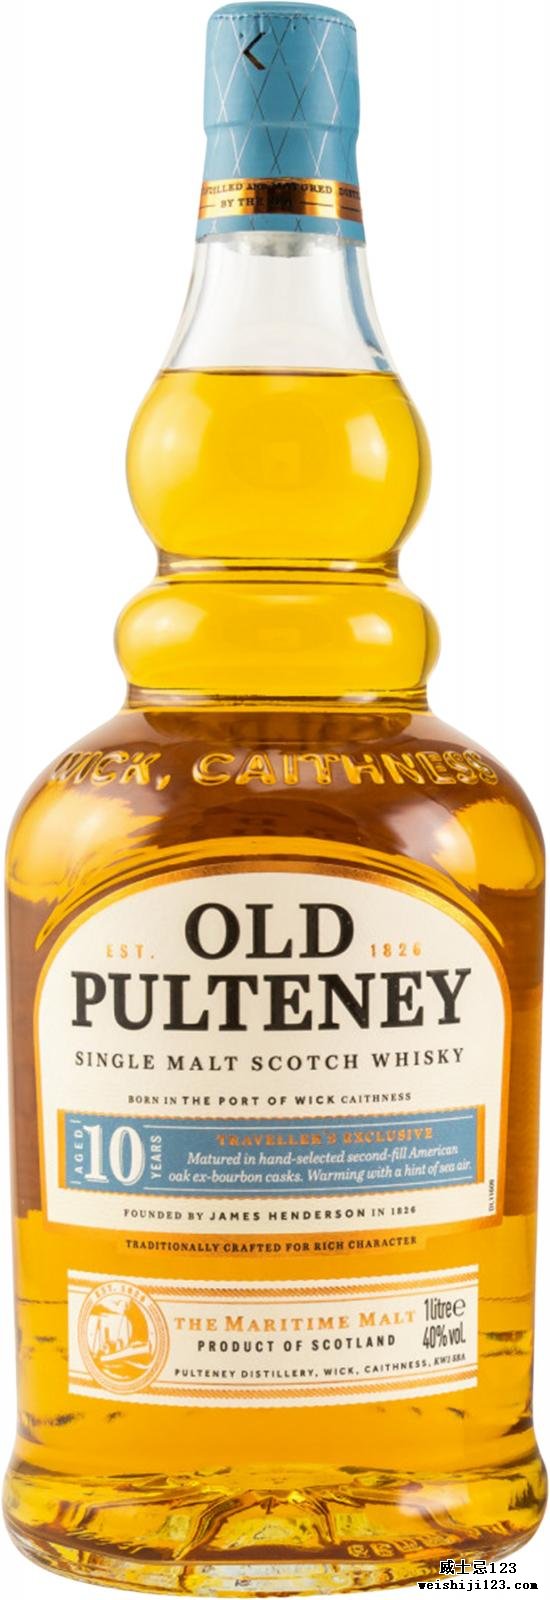 Old Pulteney 10-year-old